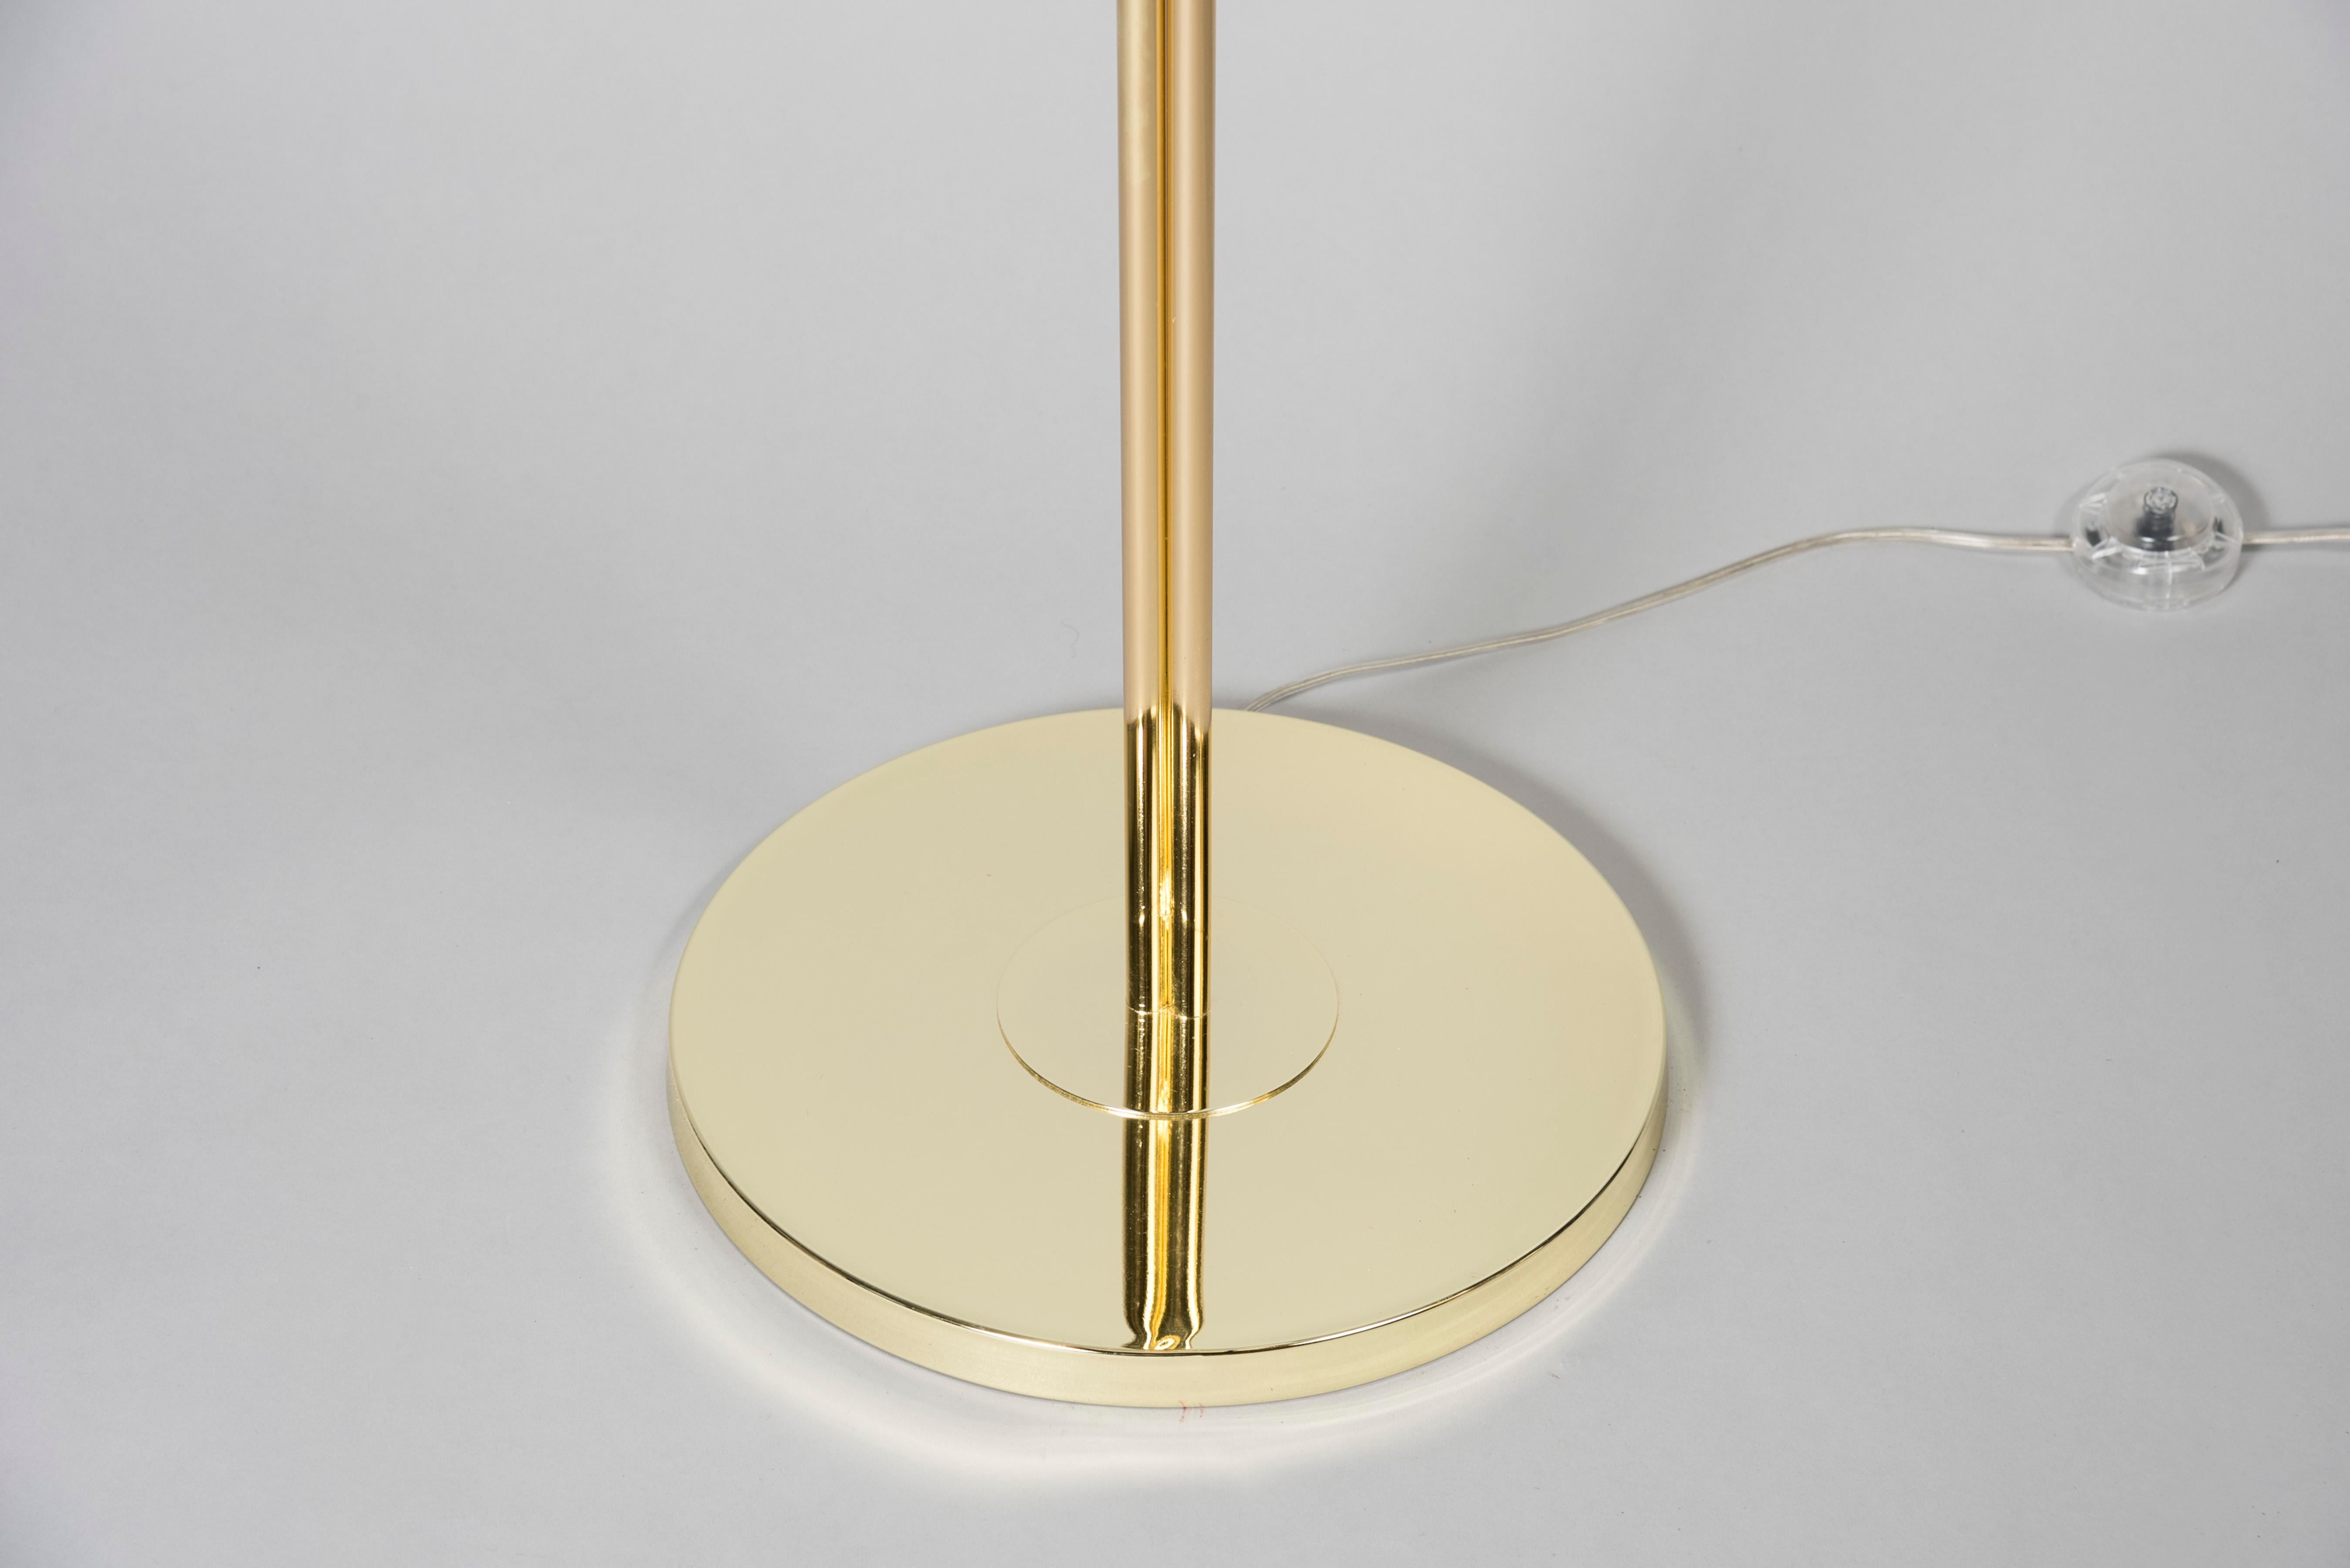 1970's polished brass floor lamp by Marie-Claude De Fouquières
Fully refinished 
Possibility of a second one to make a pair
Dimensions given without shade
No shade provided.